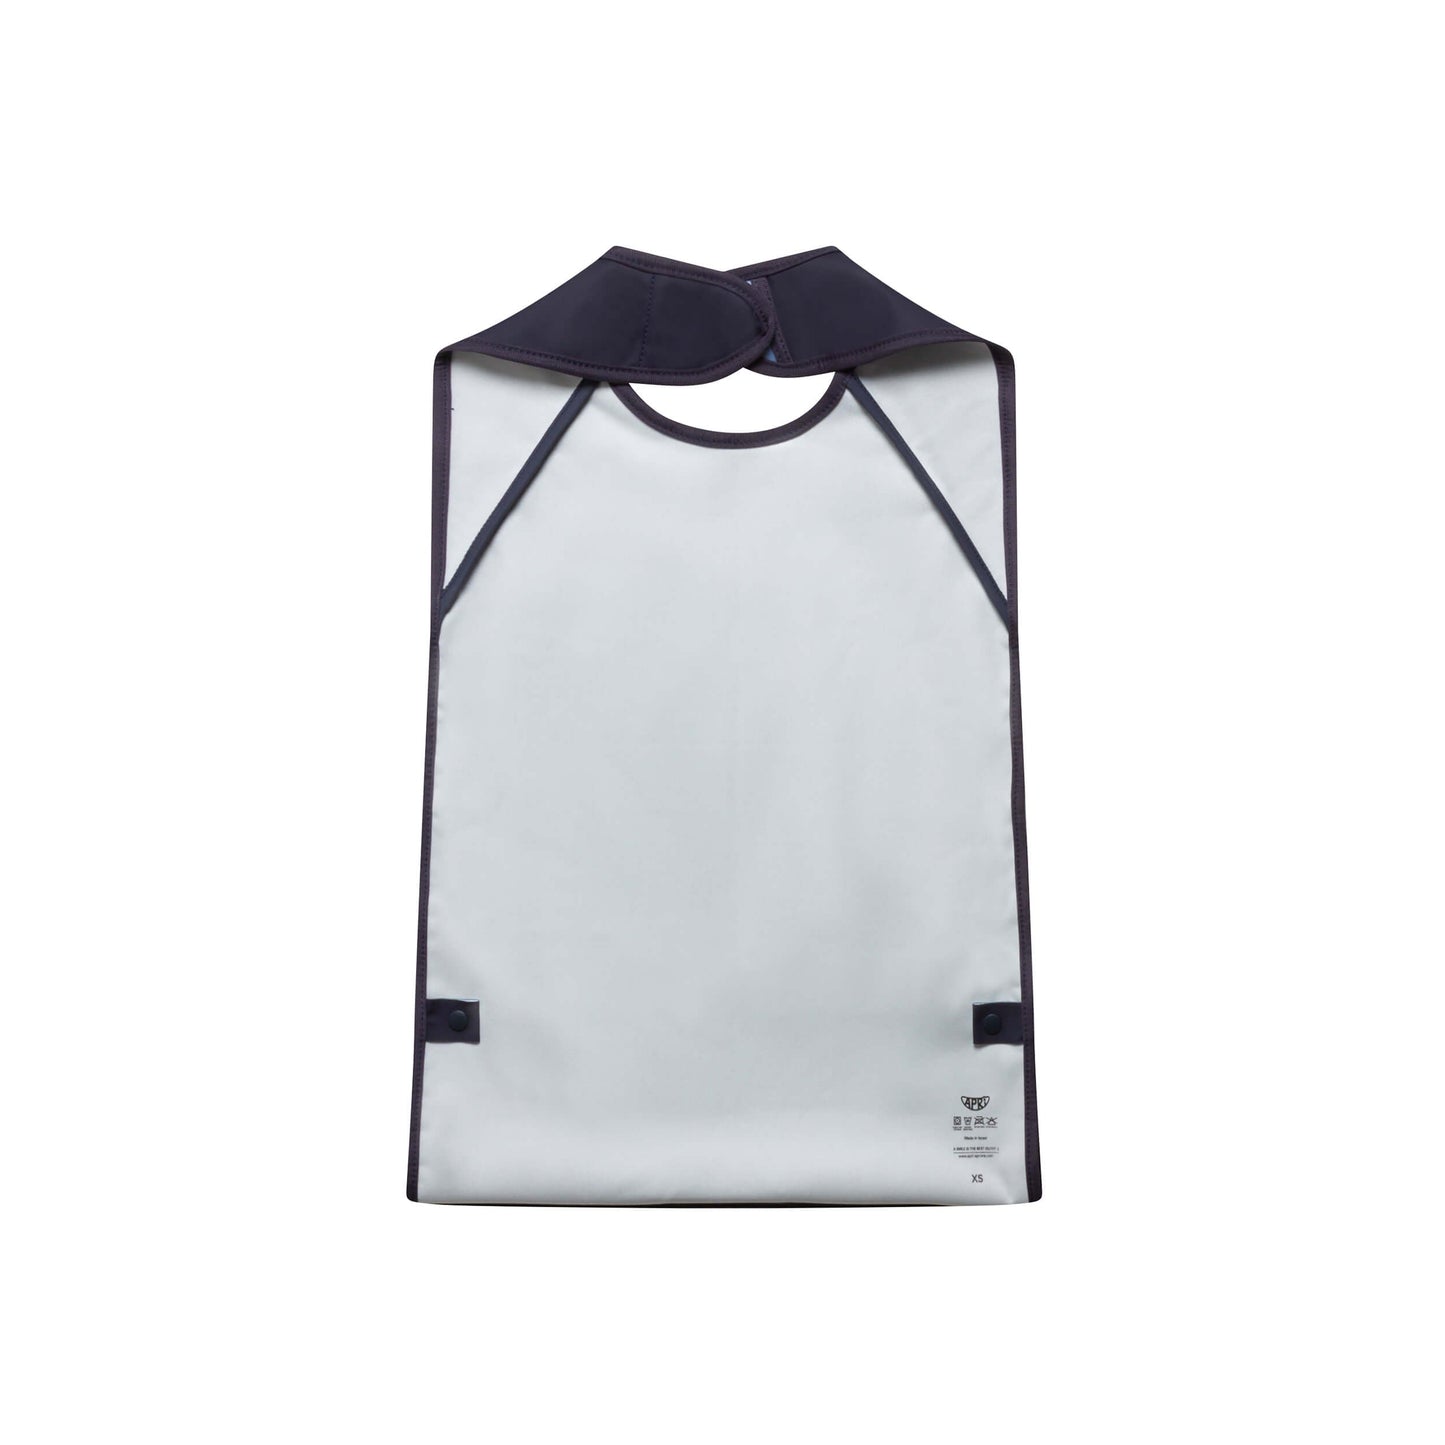 Apri bibs: Sleeveless clothing protector for adults, teens, and kids with disabilities. In classic dark blue features a food pocket and innovative fastener